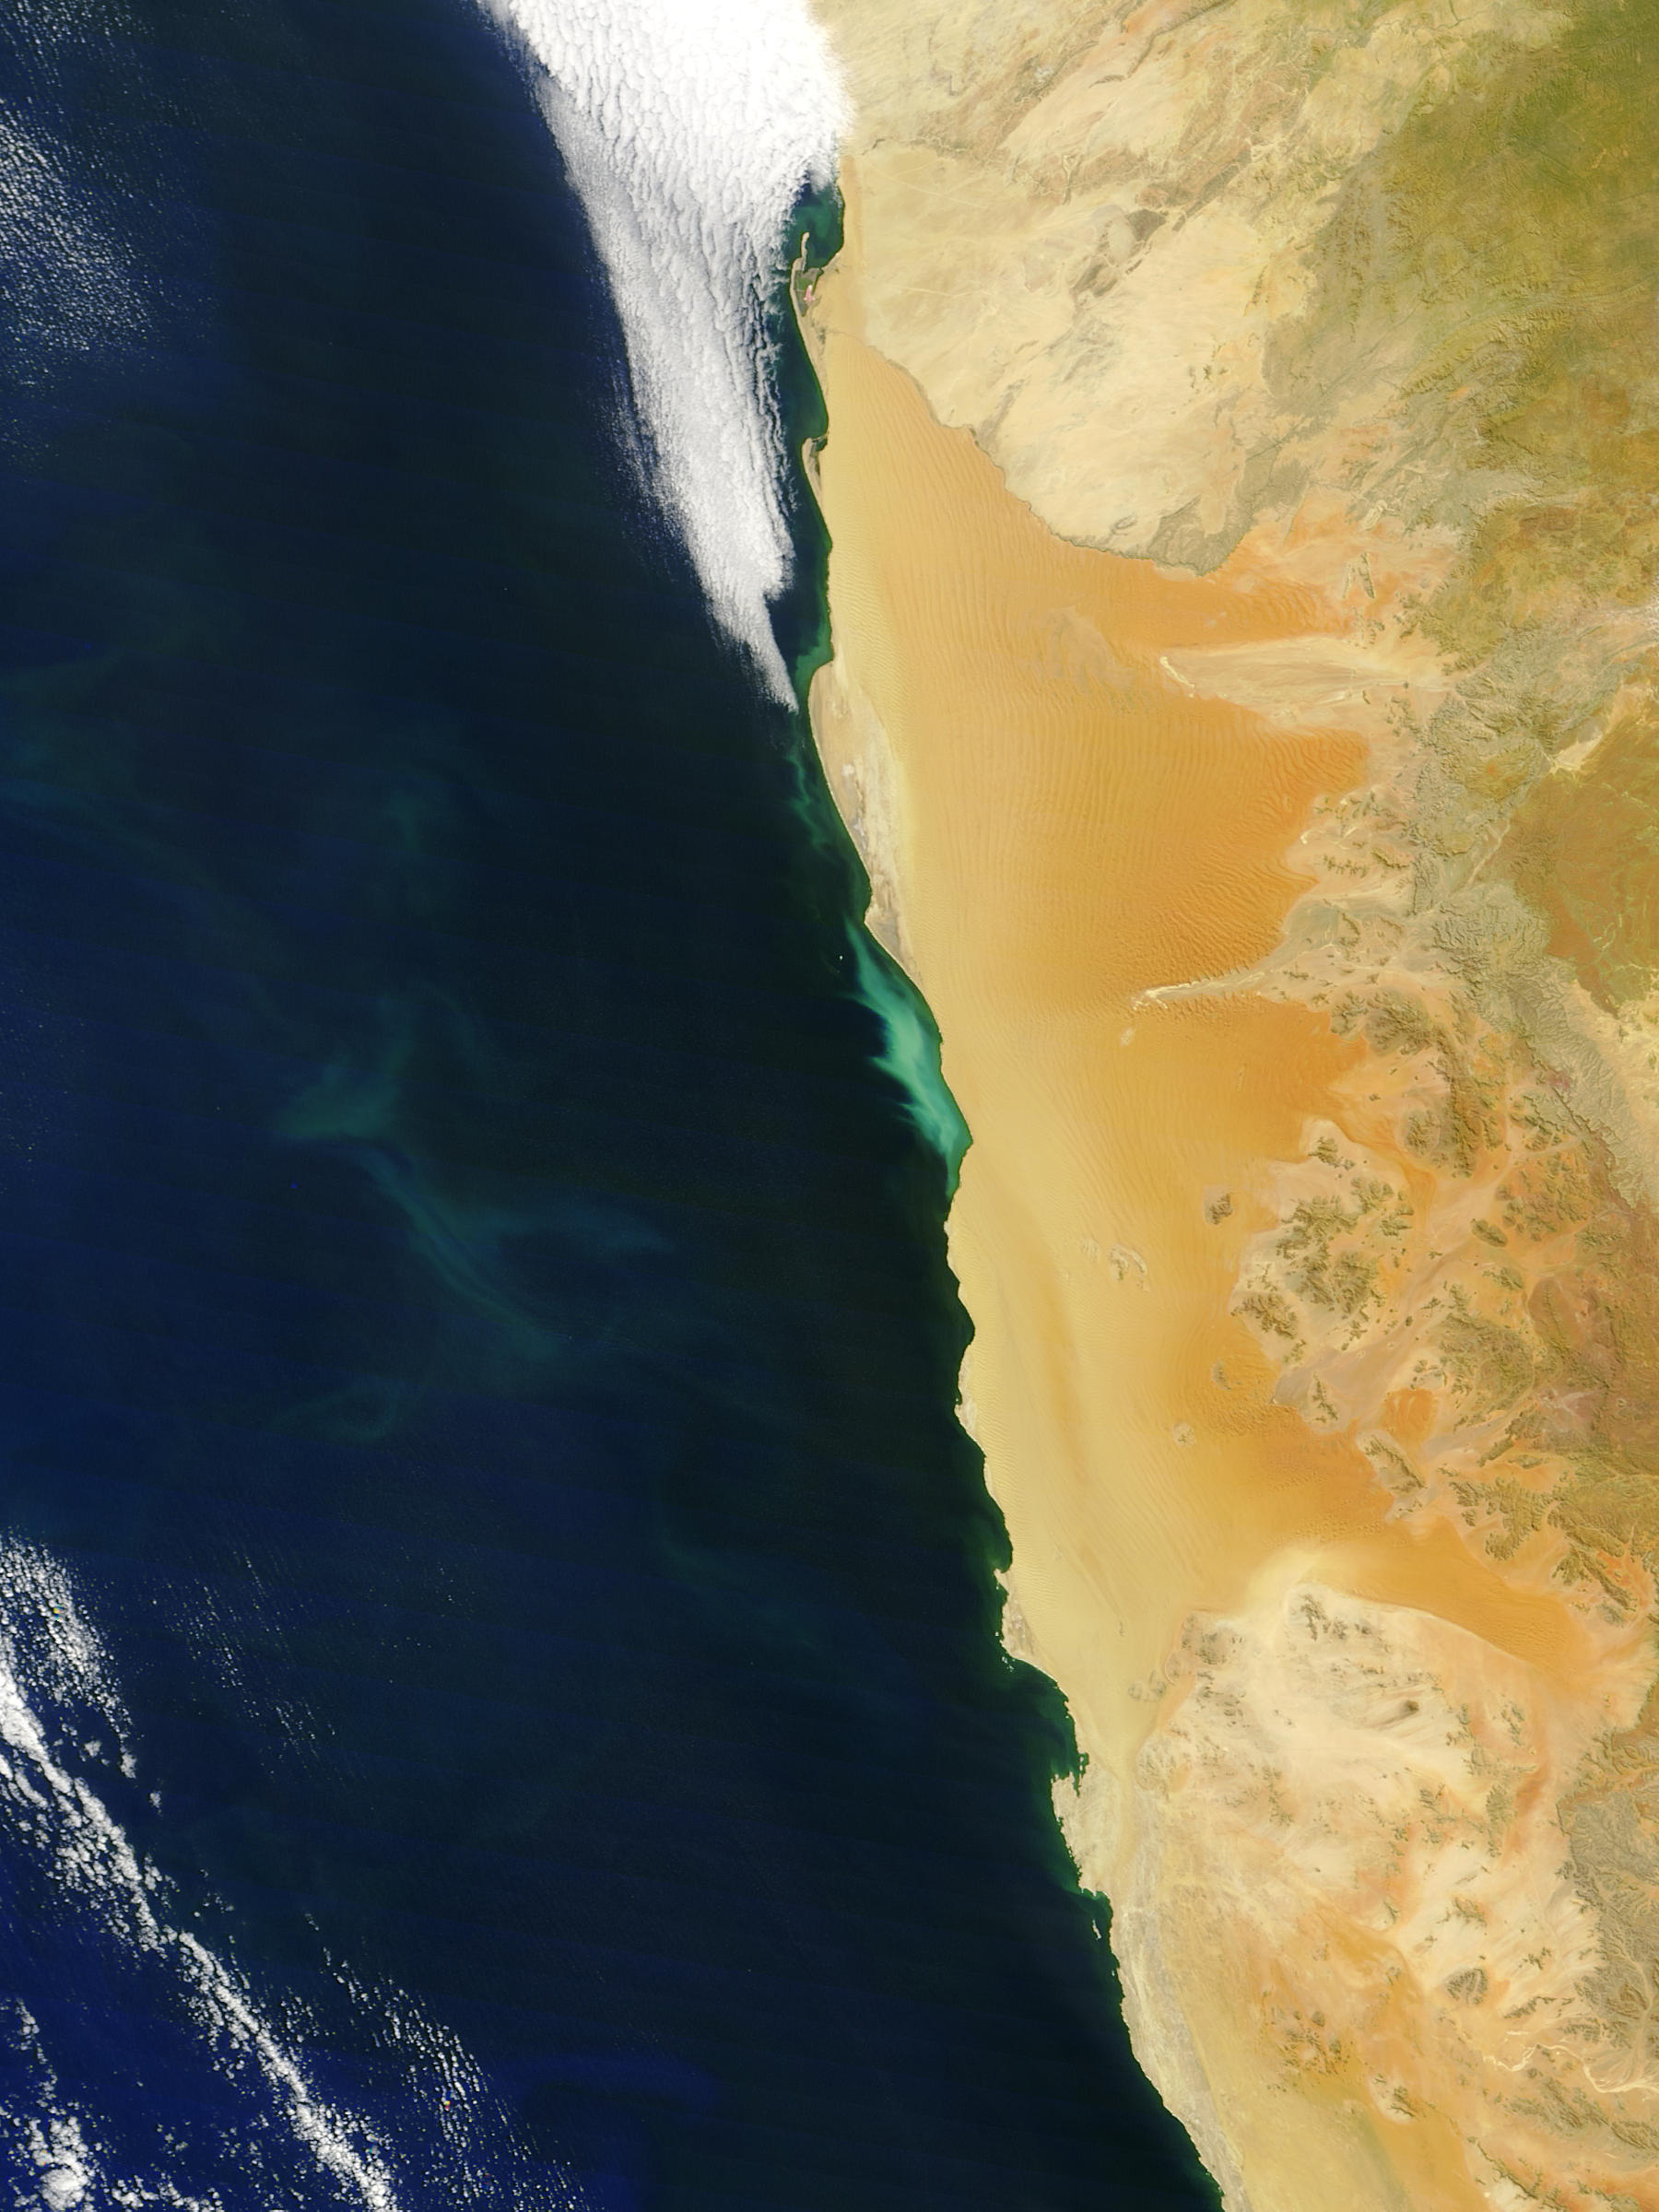 Hydrogen sulphide eruptions and phytoplankton bloom off the coast of Namibia - related image preview